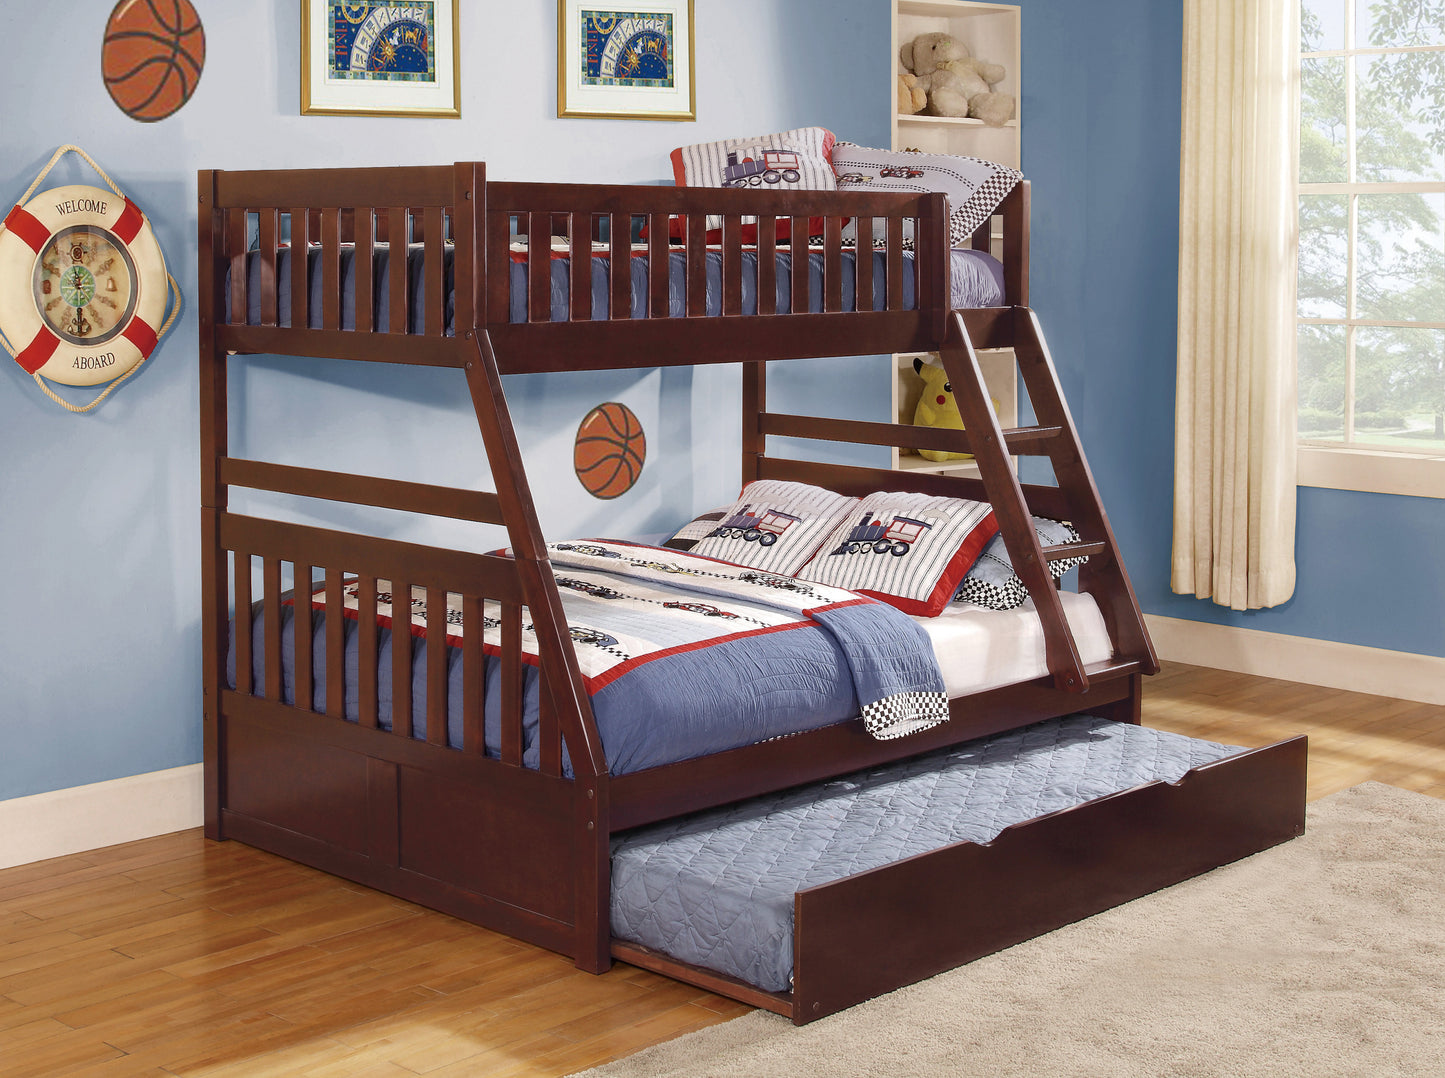 Twin/Full Bunk Bed w/ Twin Trundle (cherry)